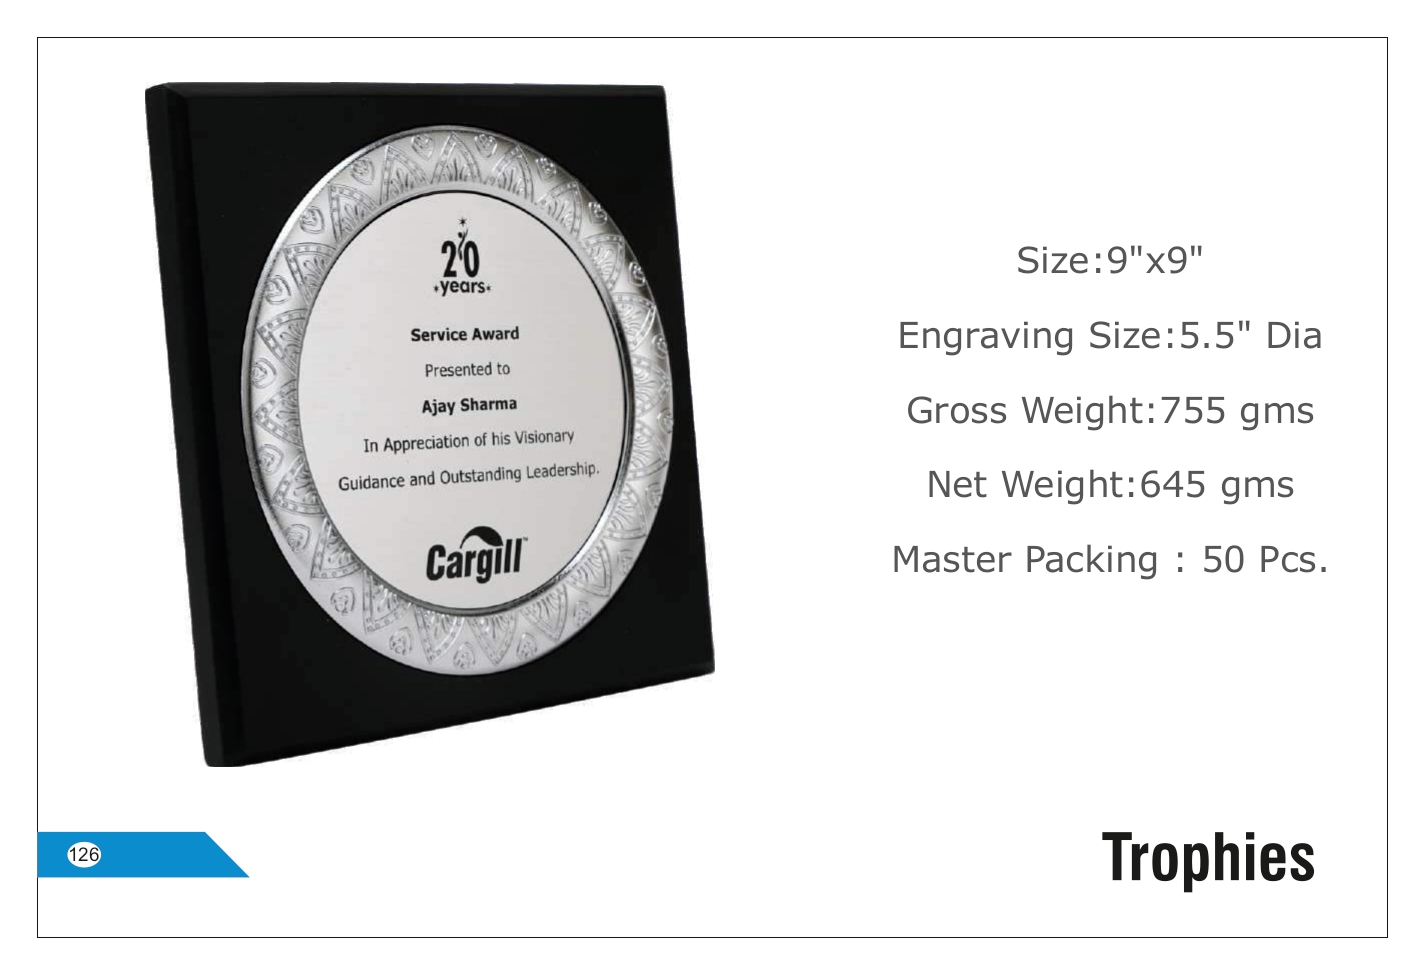 Circular Recognition Trophy - Personalized Engraving